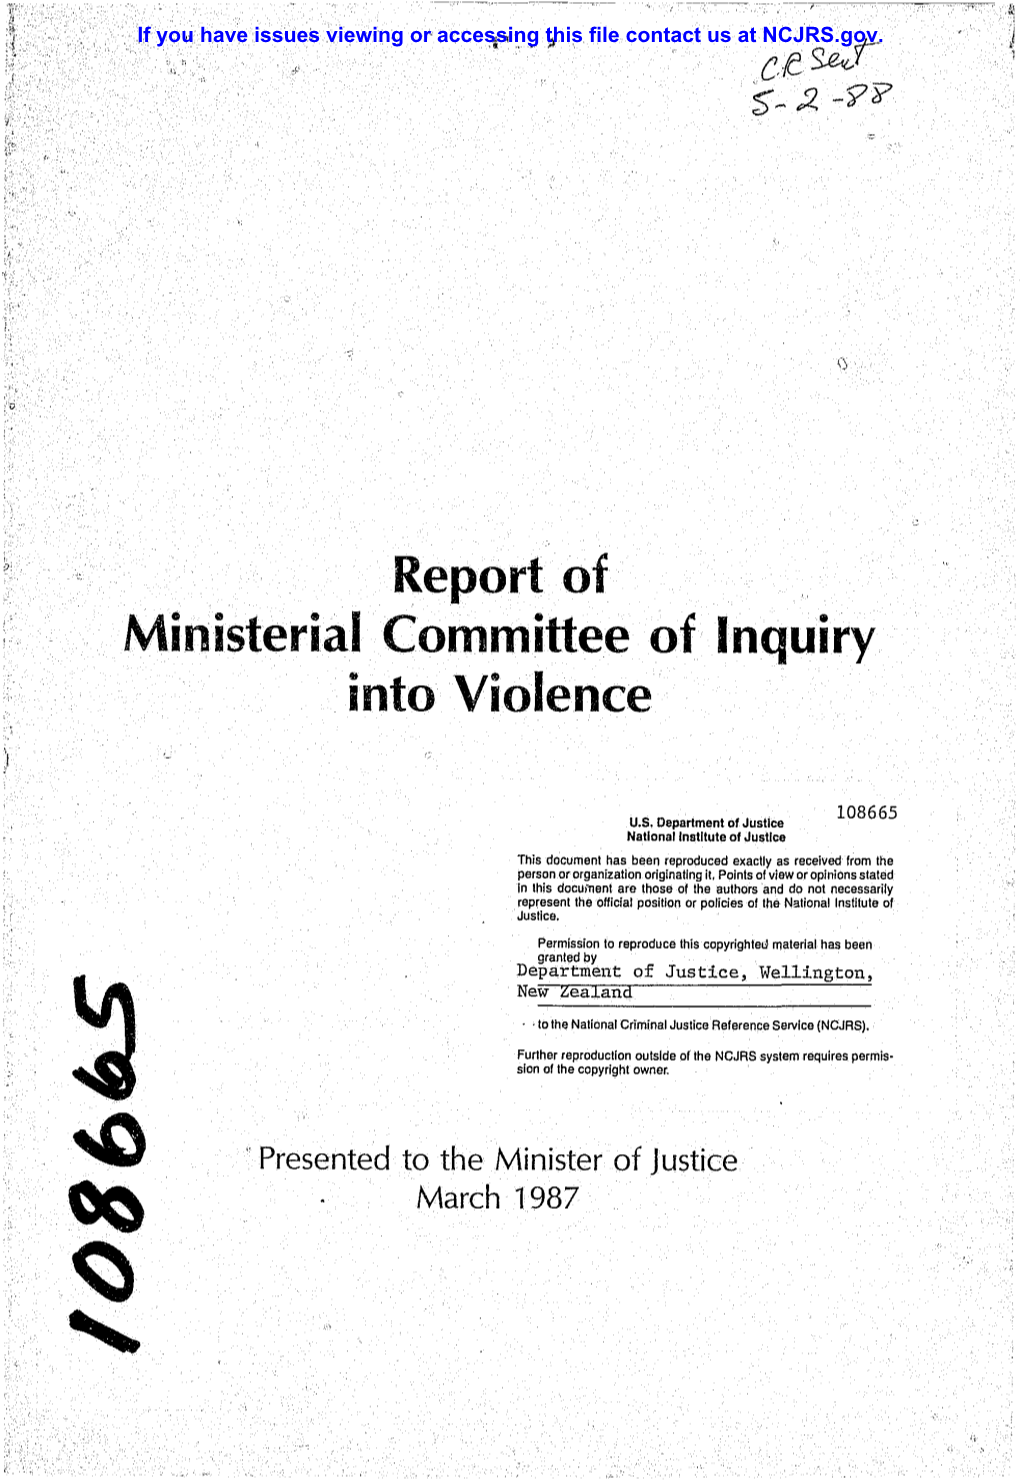 Report of Ministerial Committee of Inquiry Into Violence